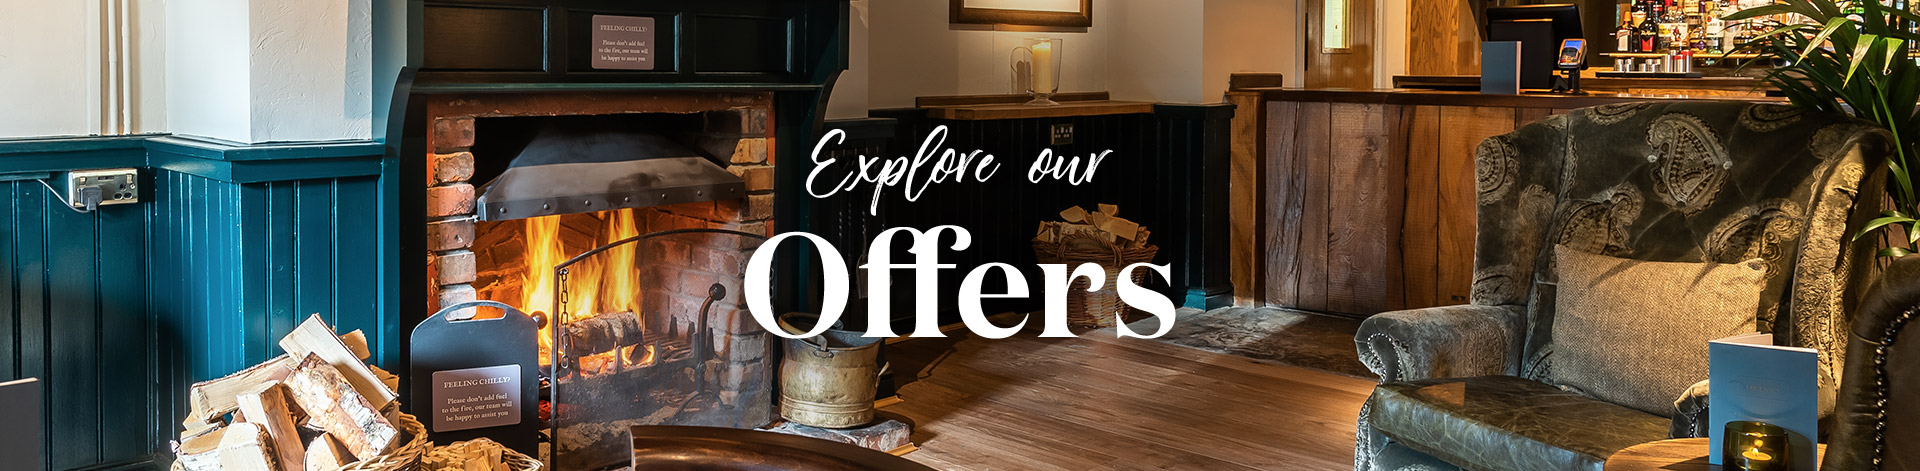 Our latest offers at The Old Stables